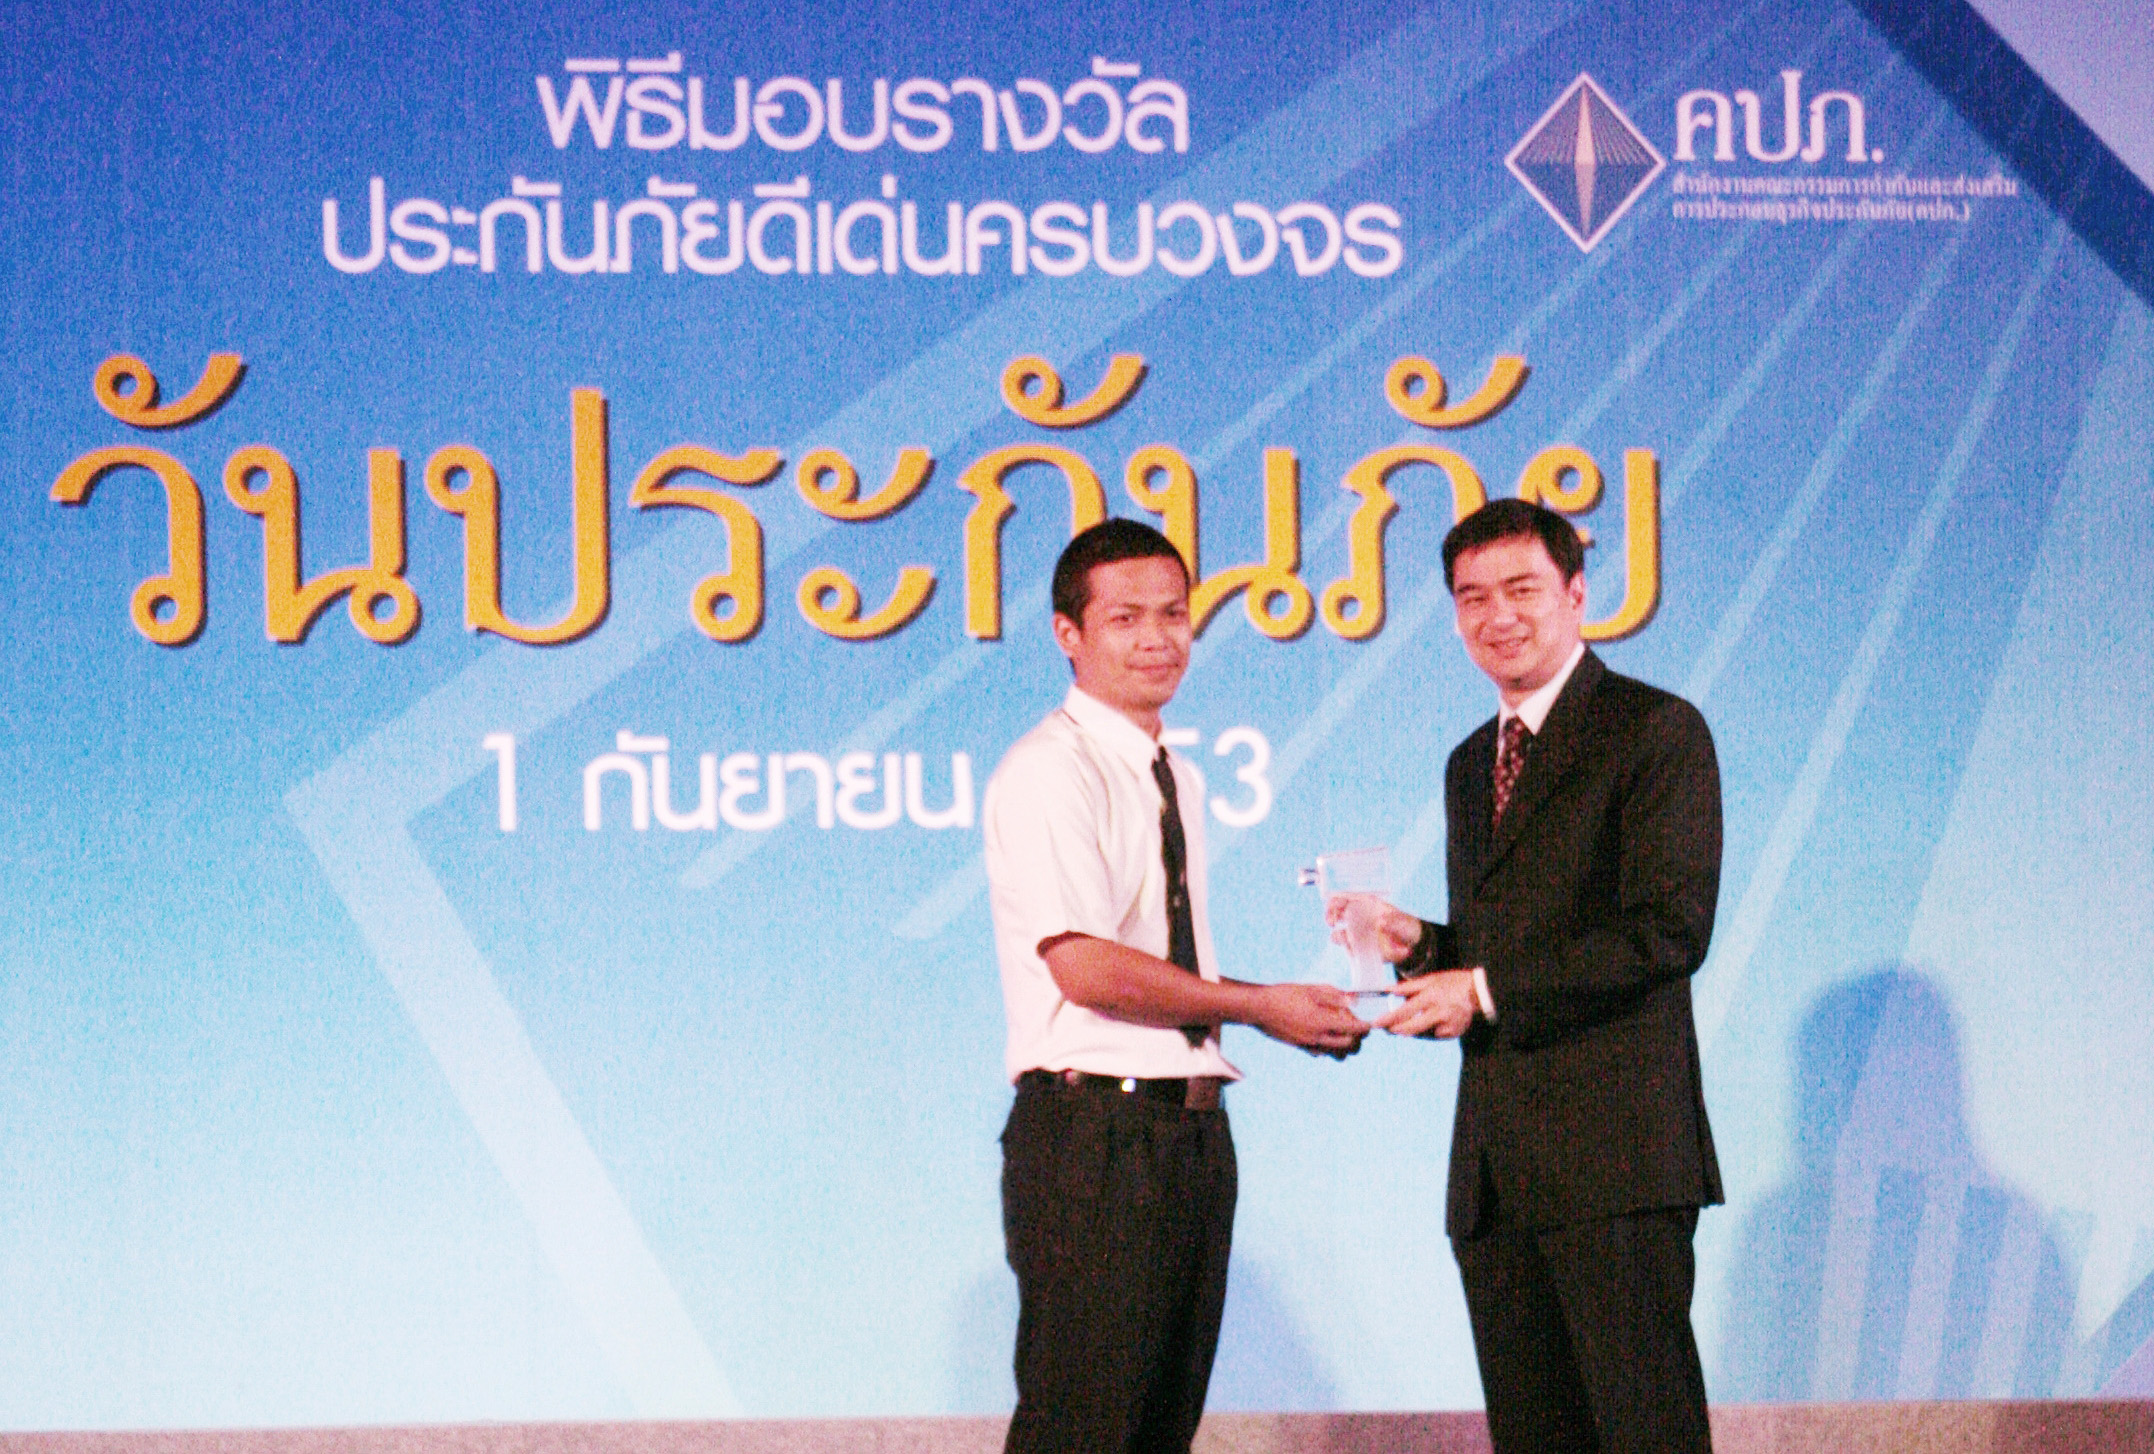 2 Winners from RMUTT win the award of Advertising Short Film Contest